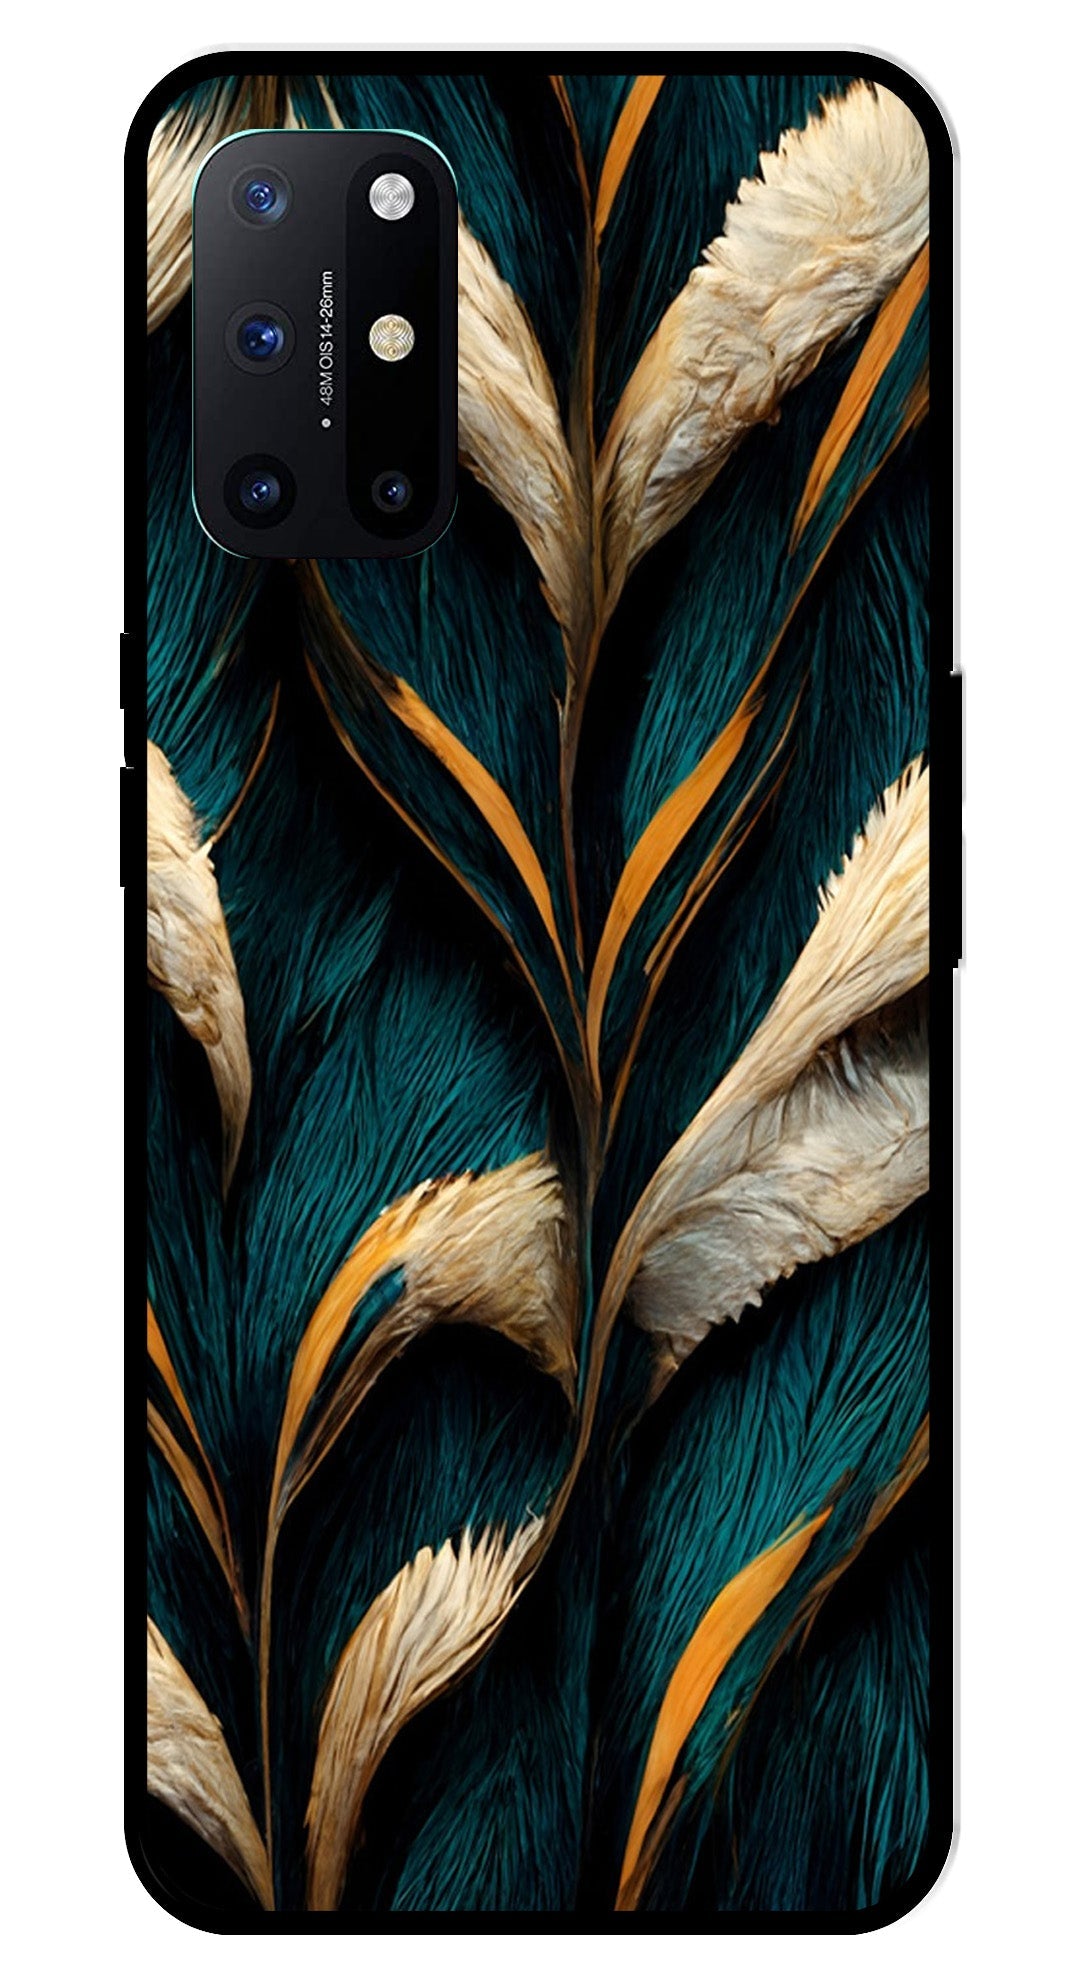 Feathers Metal Mobile Case for OnePlus 8T